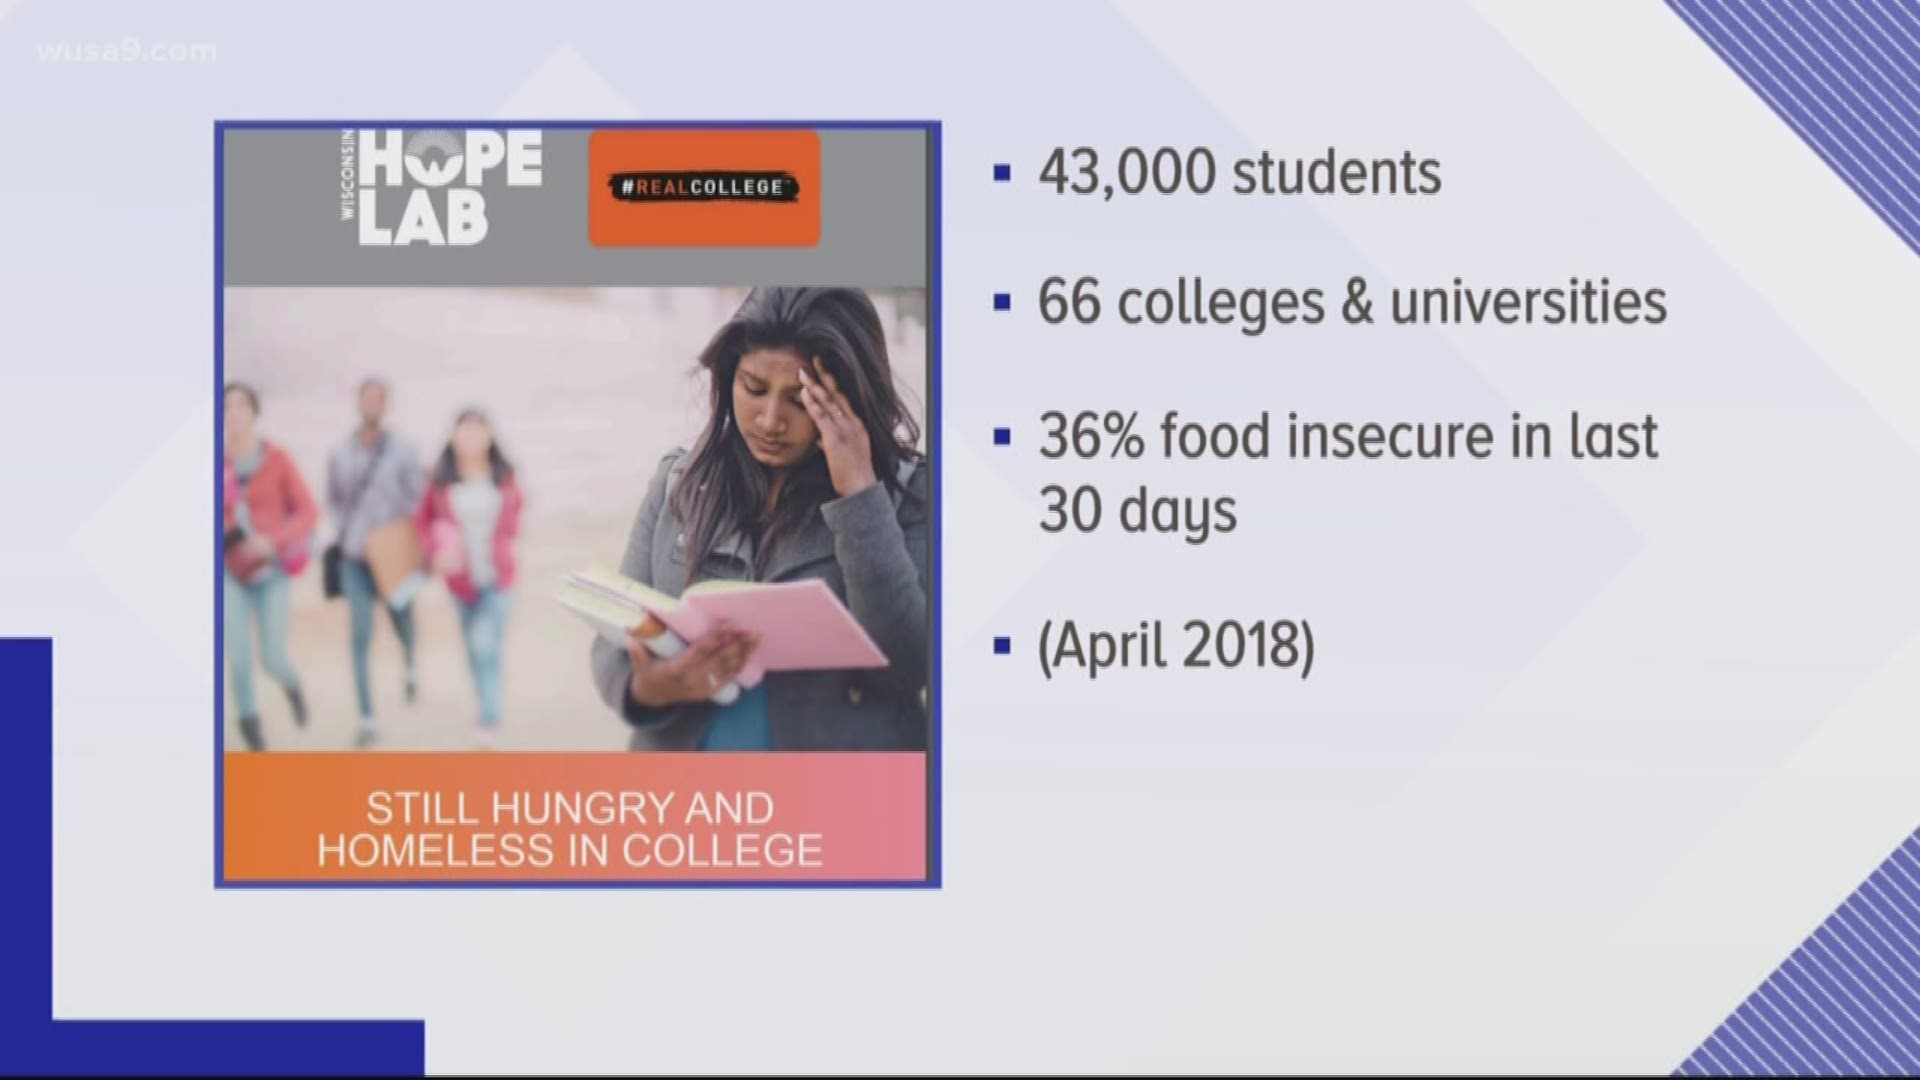 A 2018 study surveyed 43,000 students from 66 different colleges and universities. Researchers found 36% of students were food insecure.